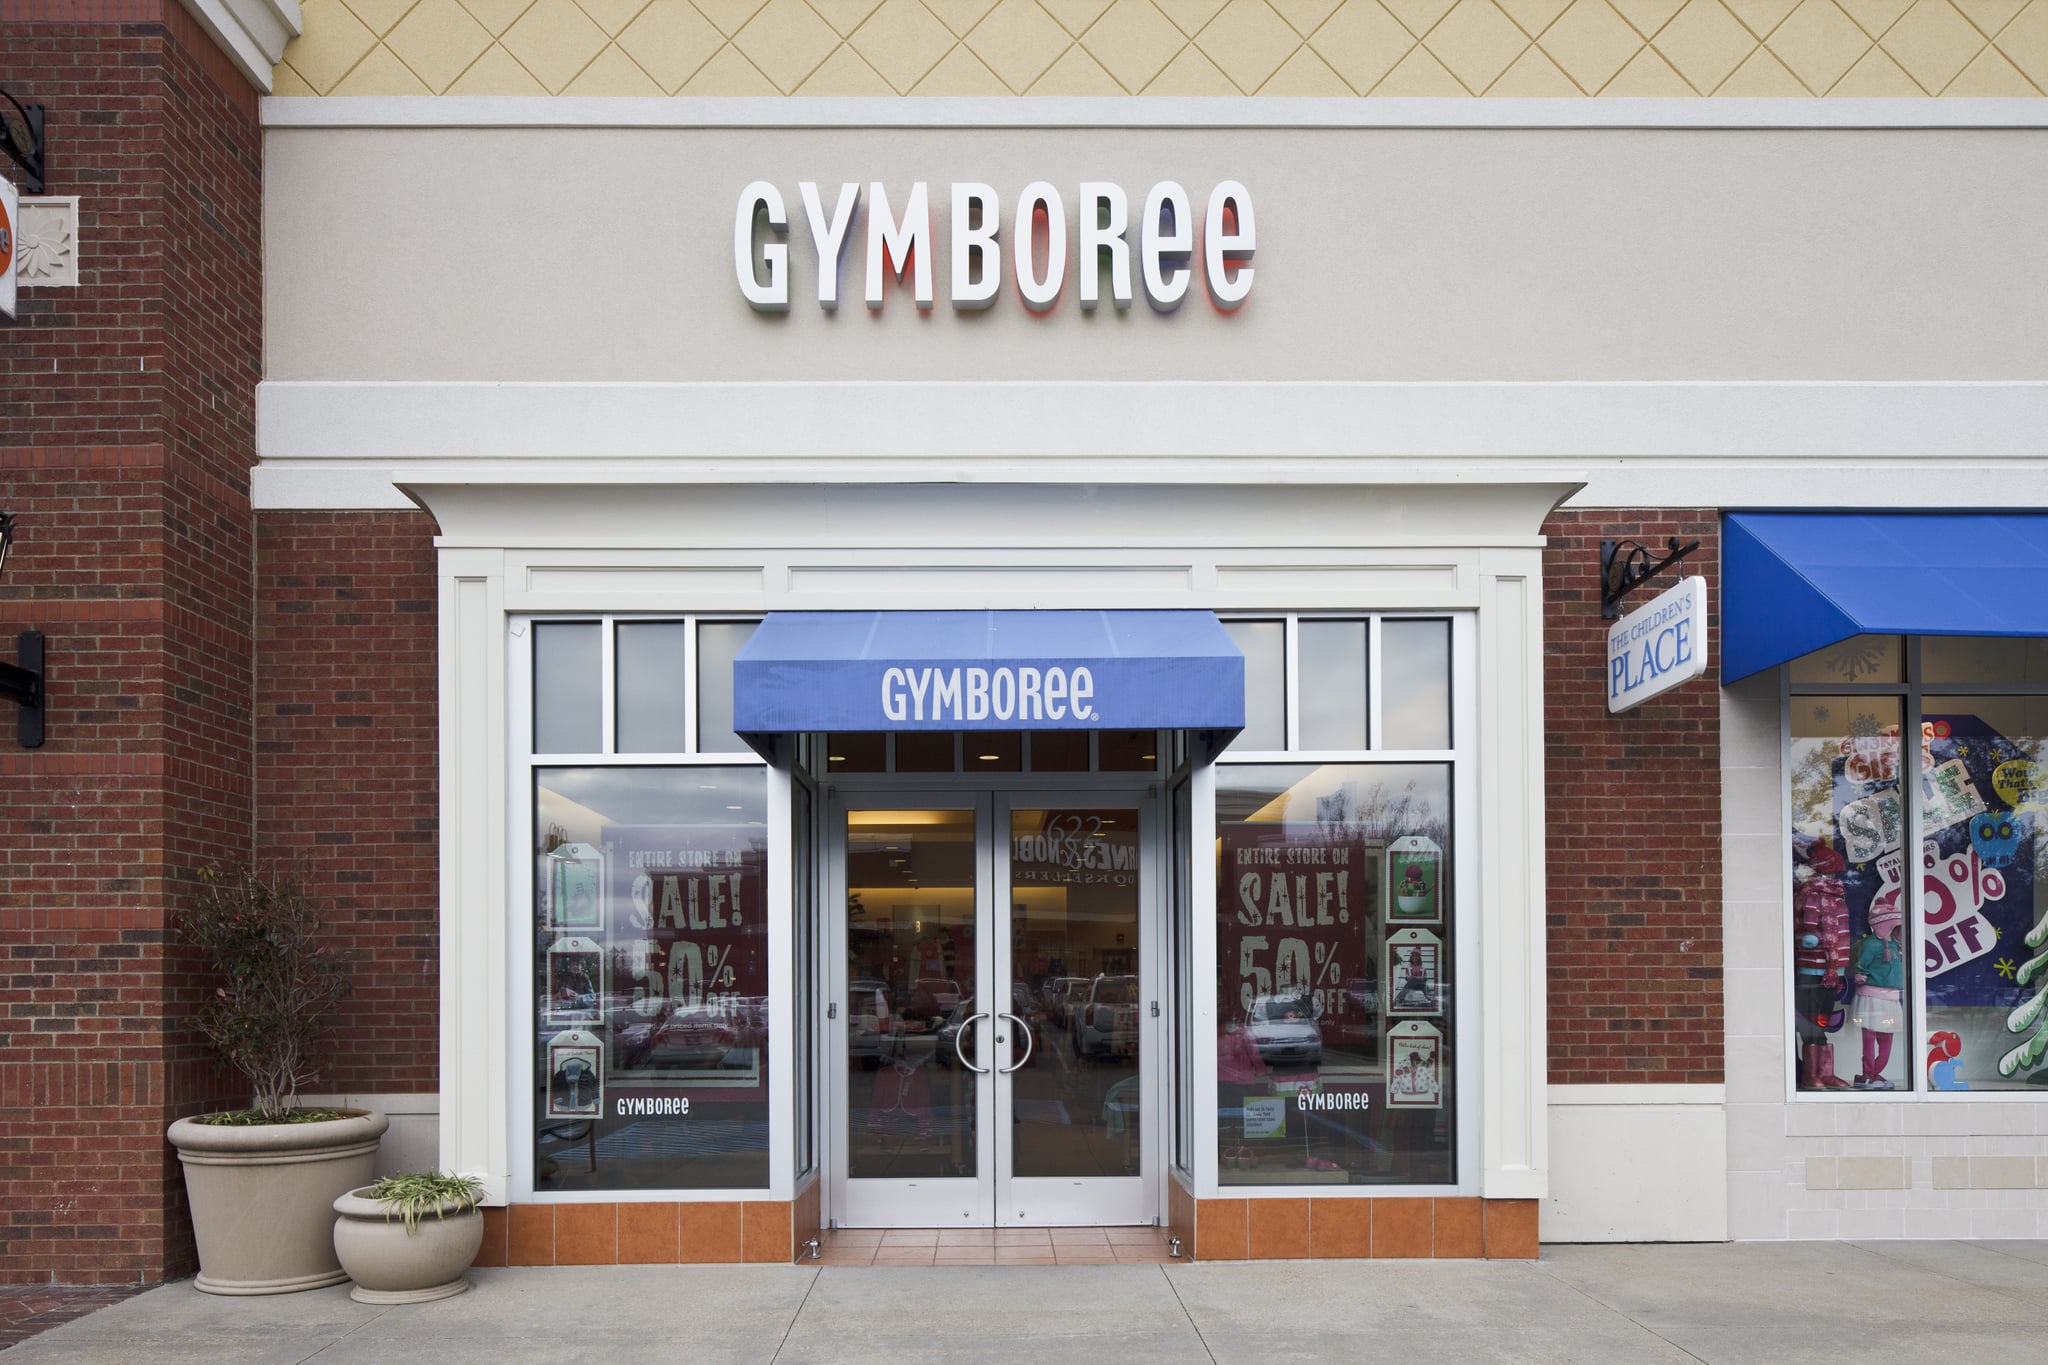 Gymboree at The Avenue shopping mall at Carriage Crossing in Collierville, Tenn. (Photo by James Leynse/Corbis via Getty Images)